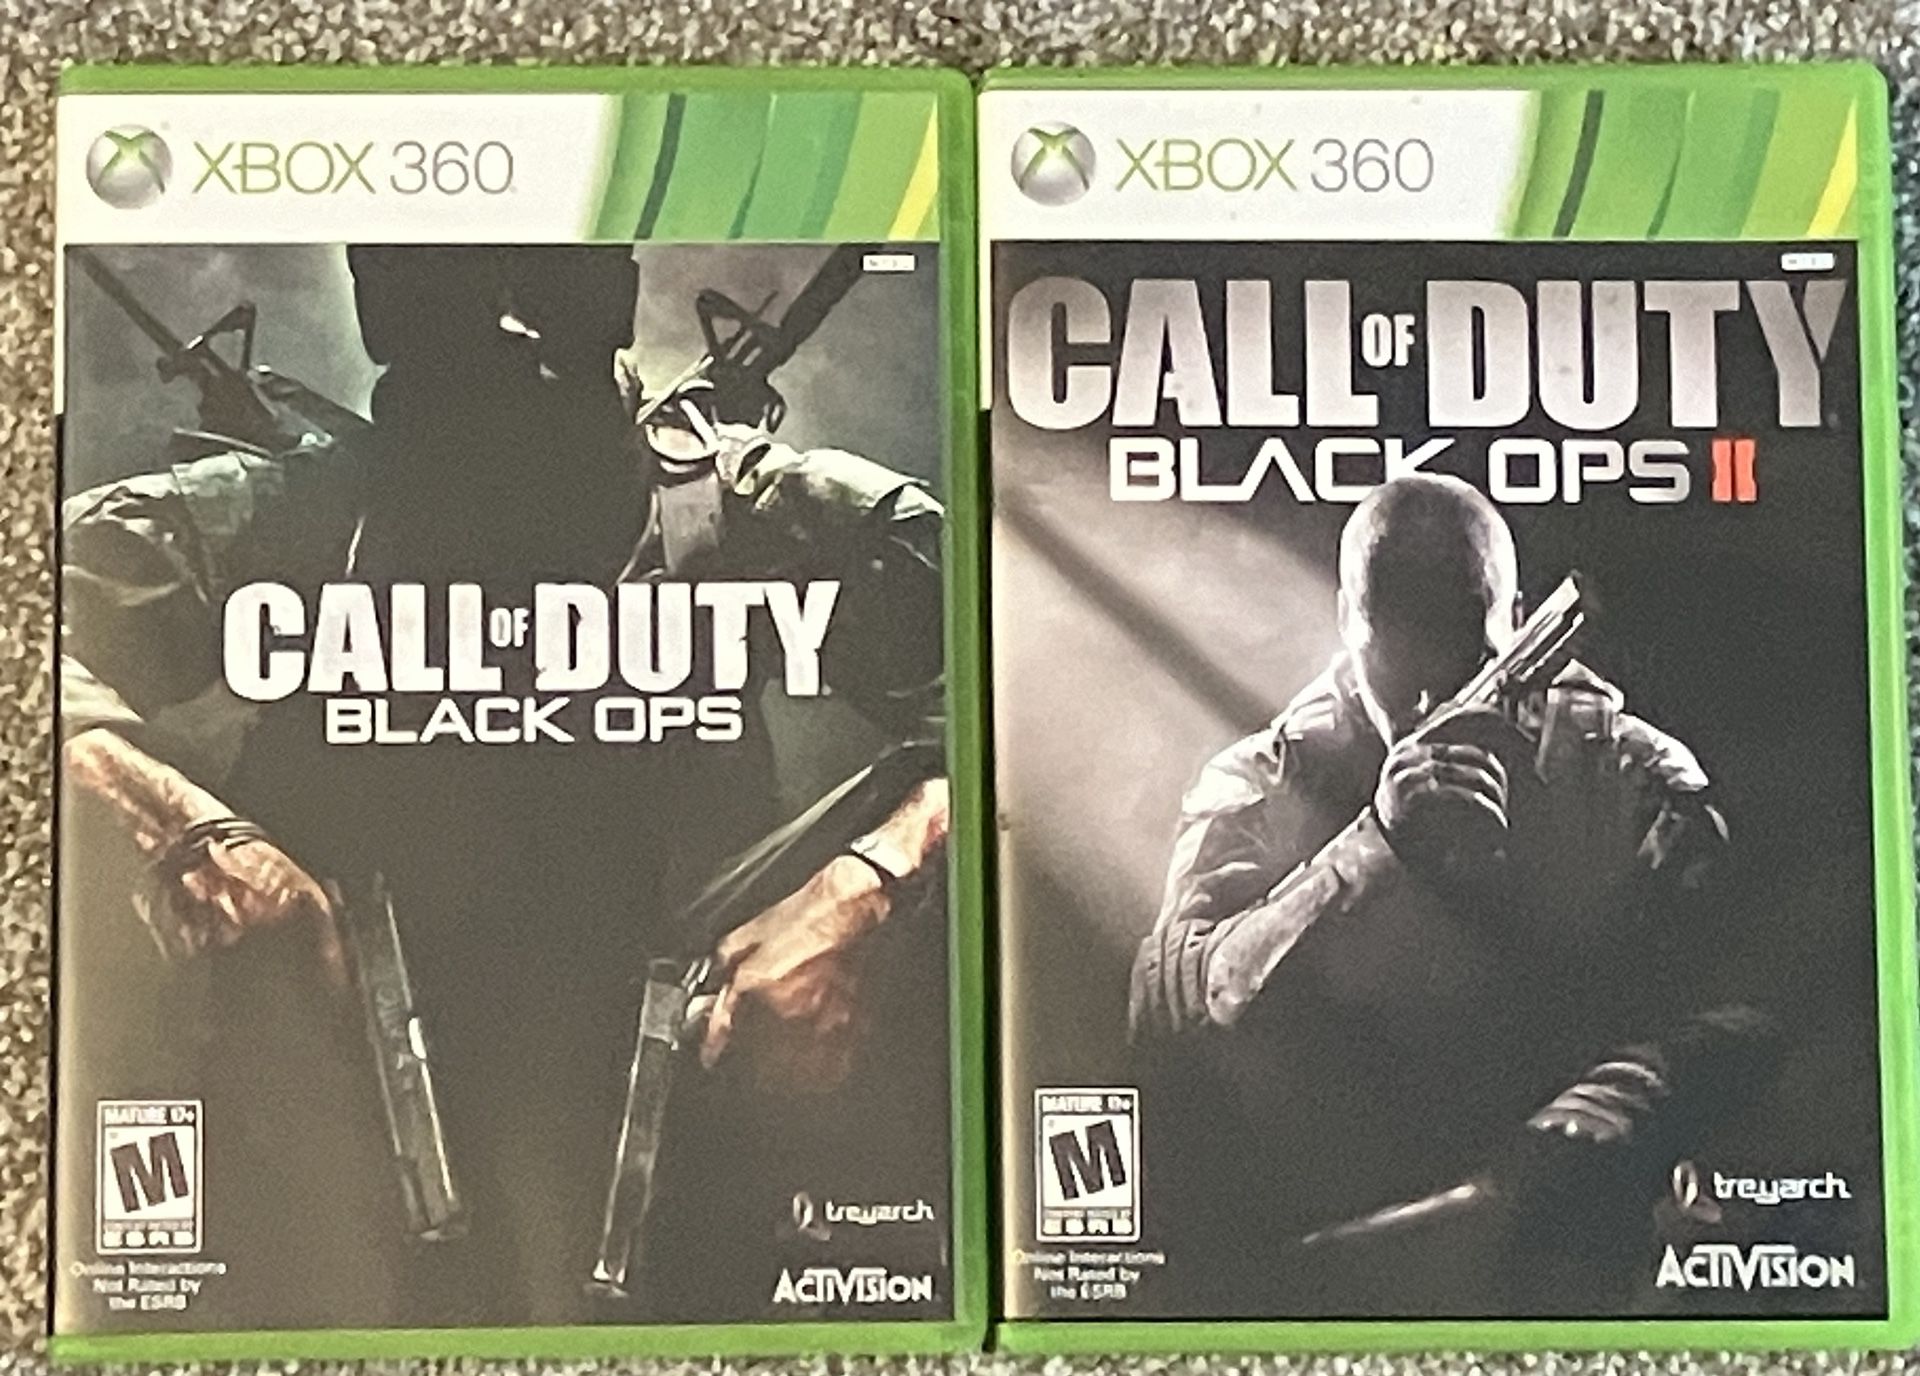 Call Of Duty Black Ops & Black Ops 2